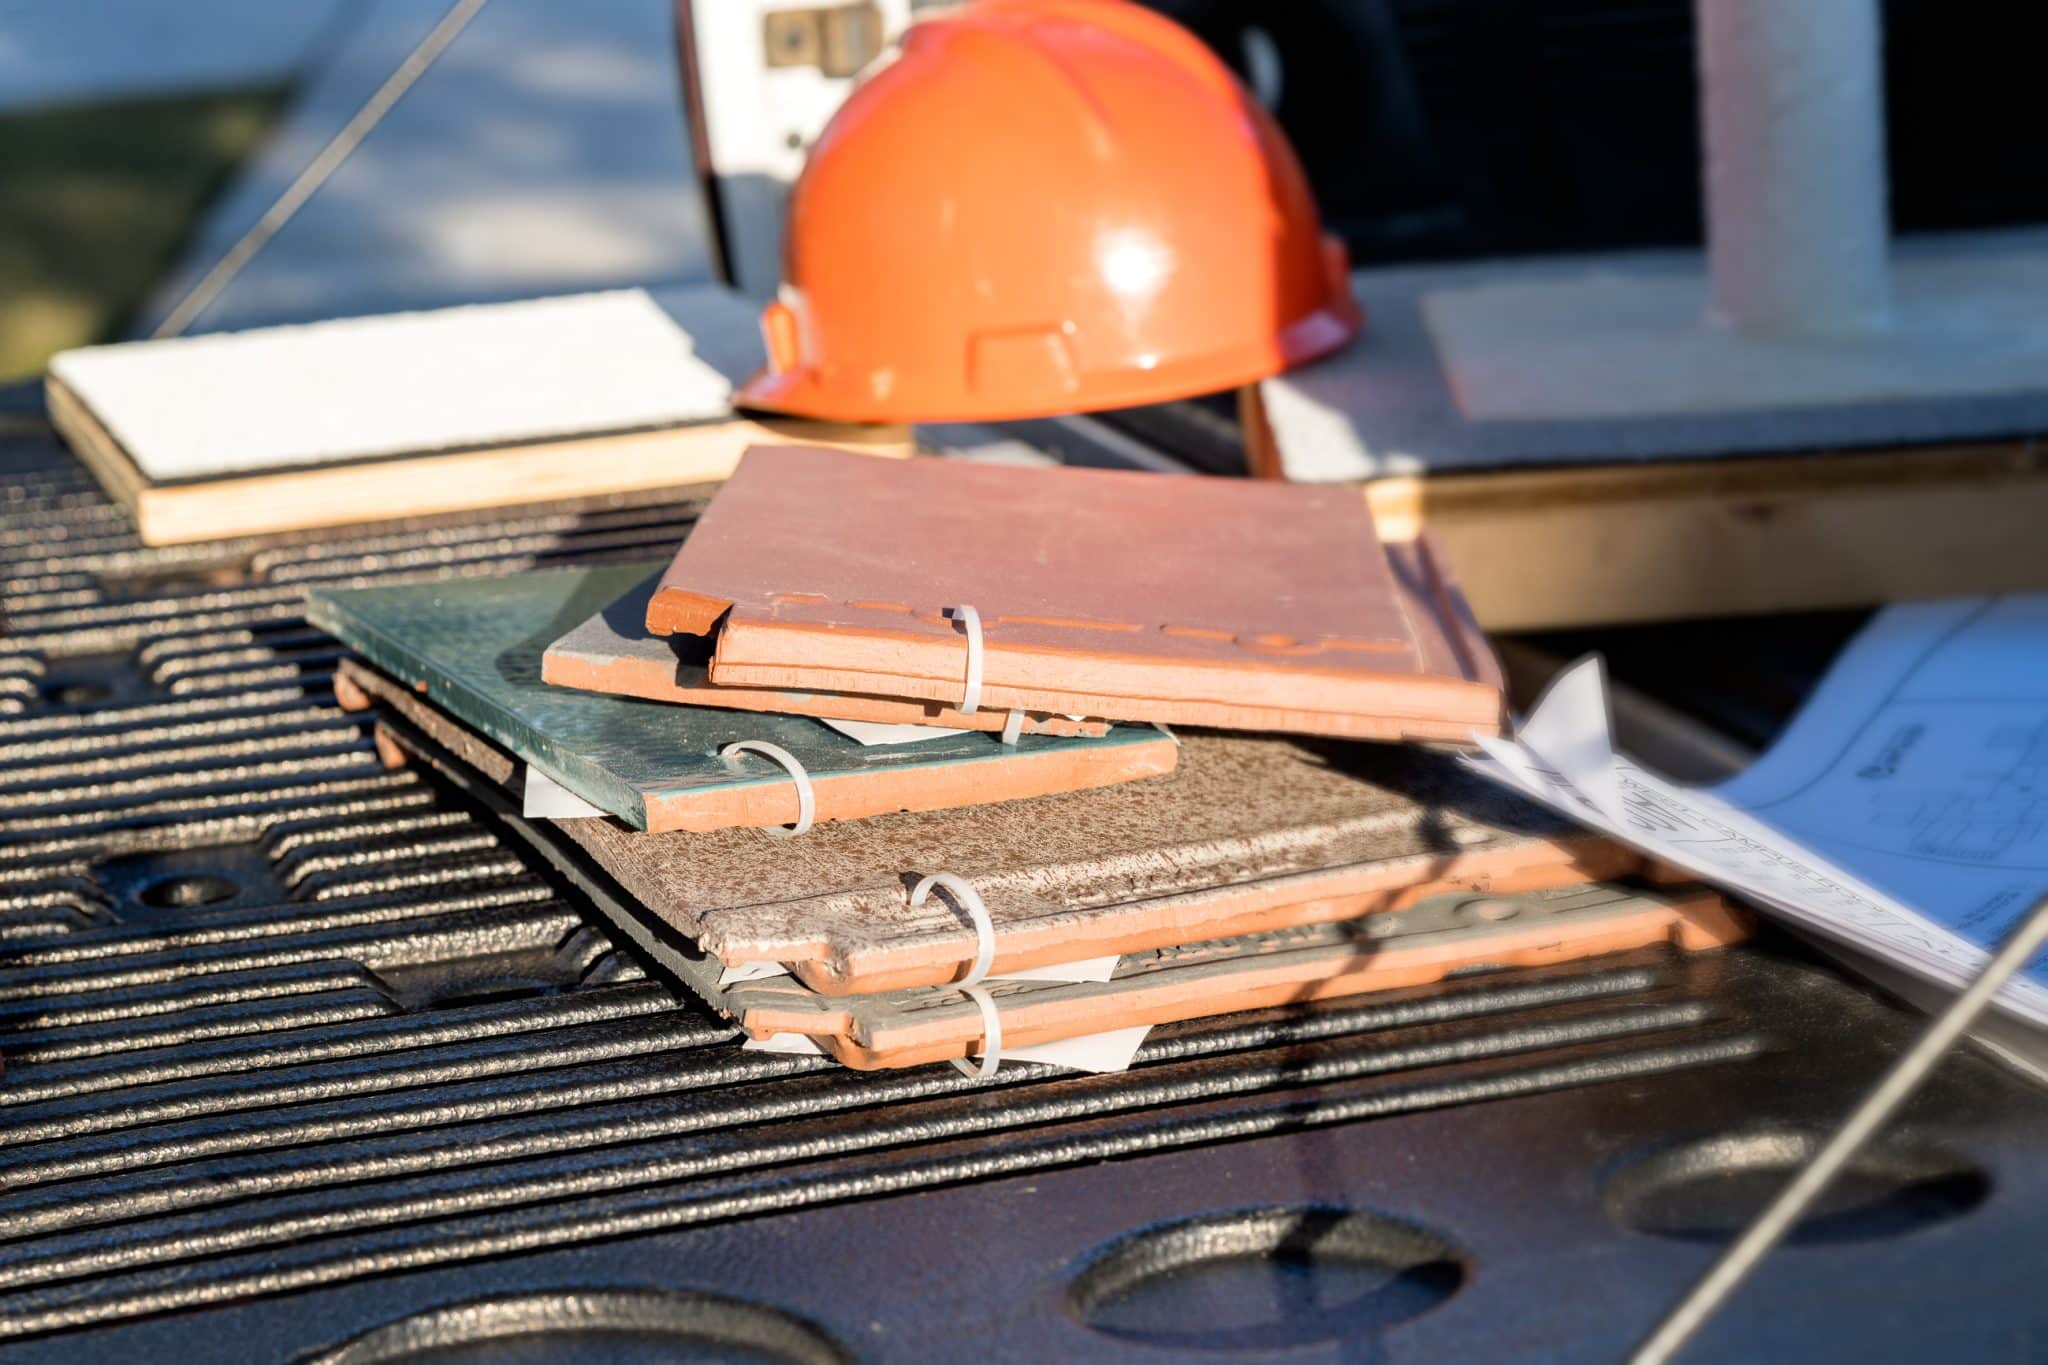 Sample roofing materials and an orange hardhat in the bed of a pickup truck